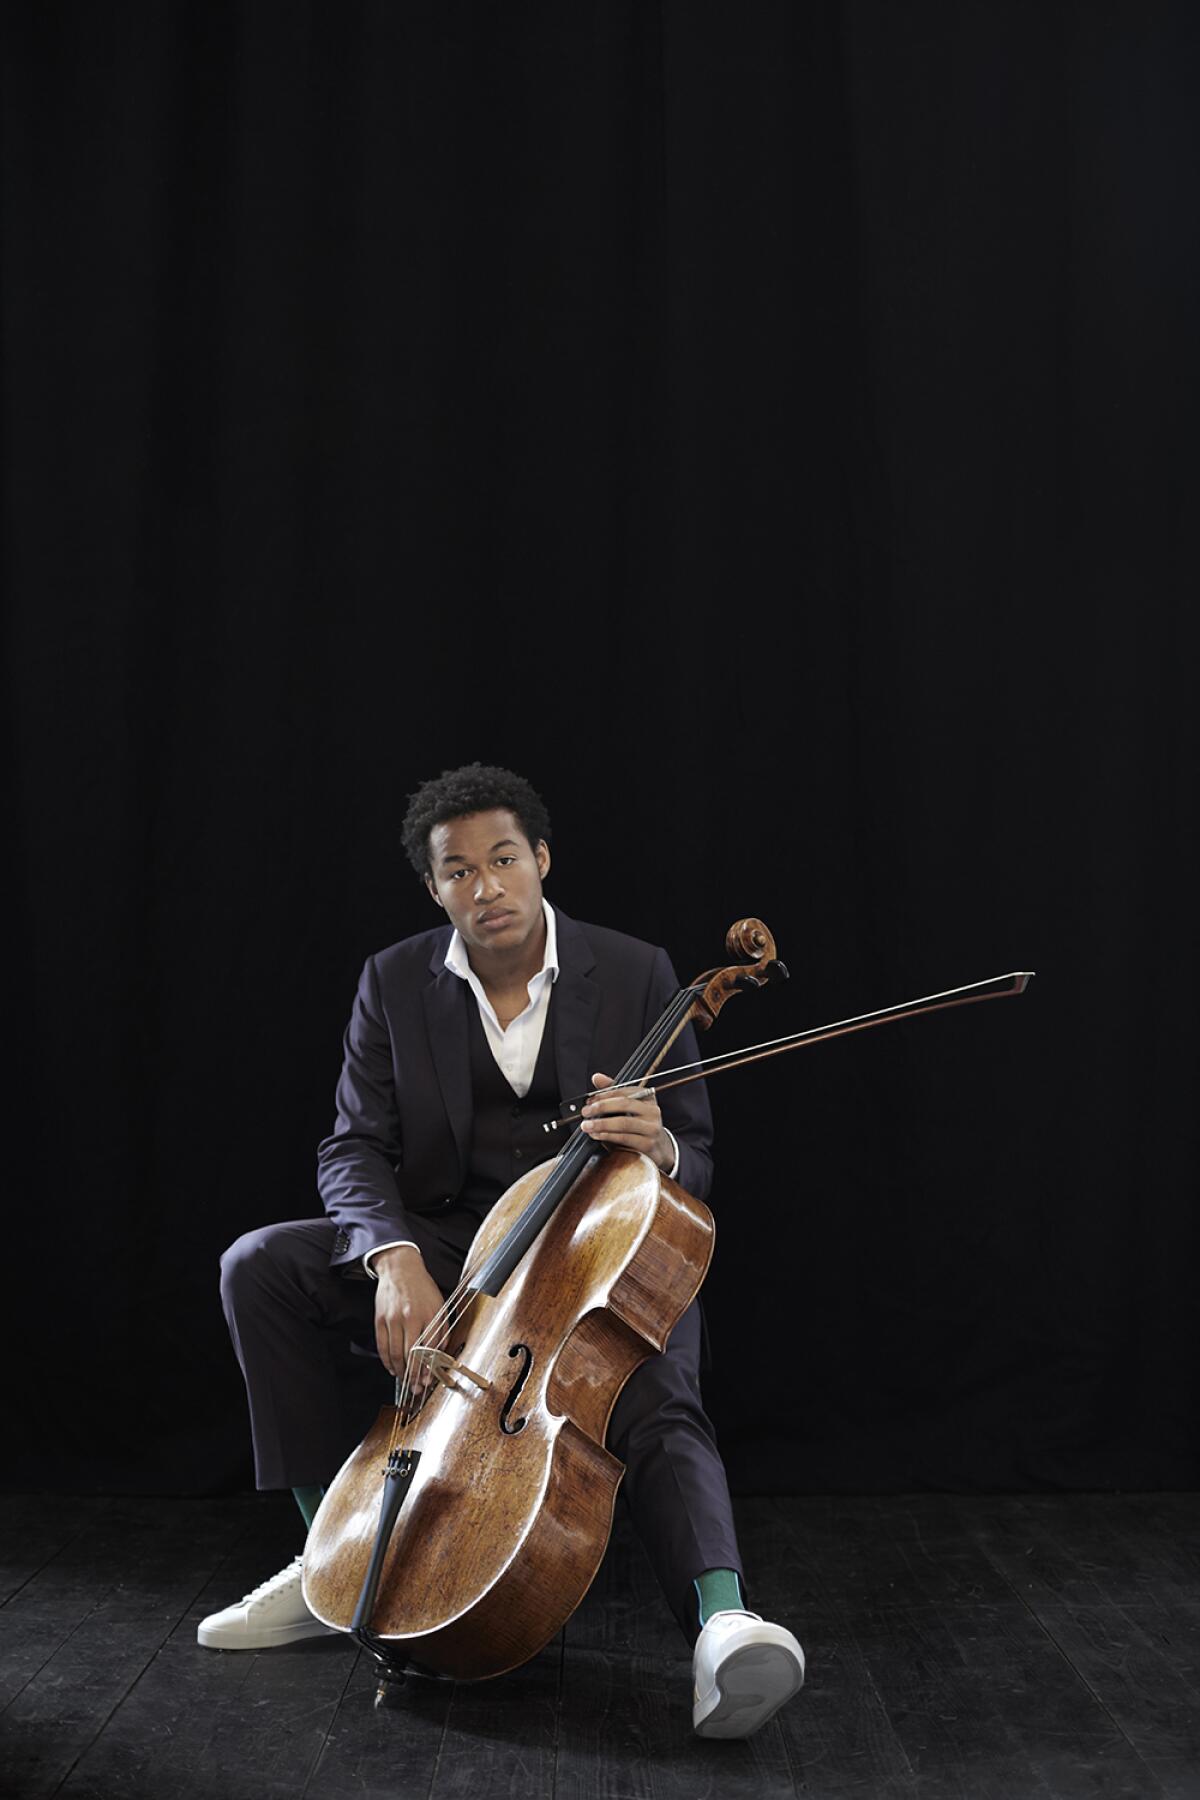 A seated man poses with a cello.